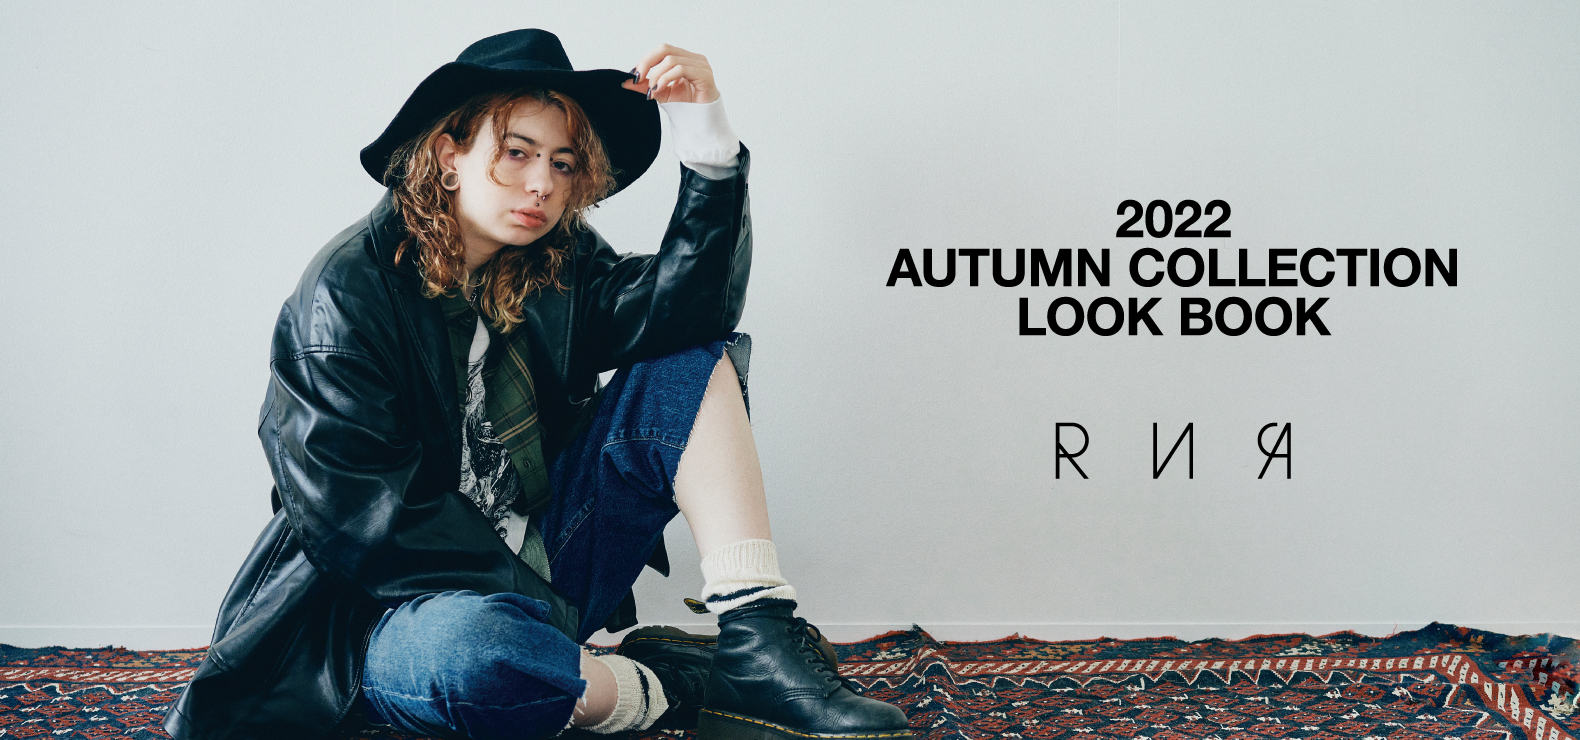 2022 AUTUMN COLLECTION LOOK BOOK